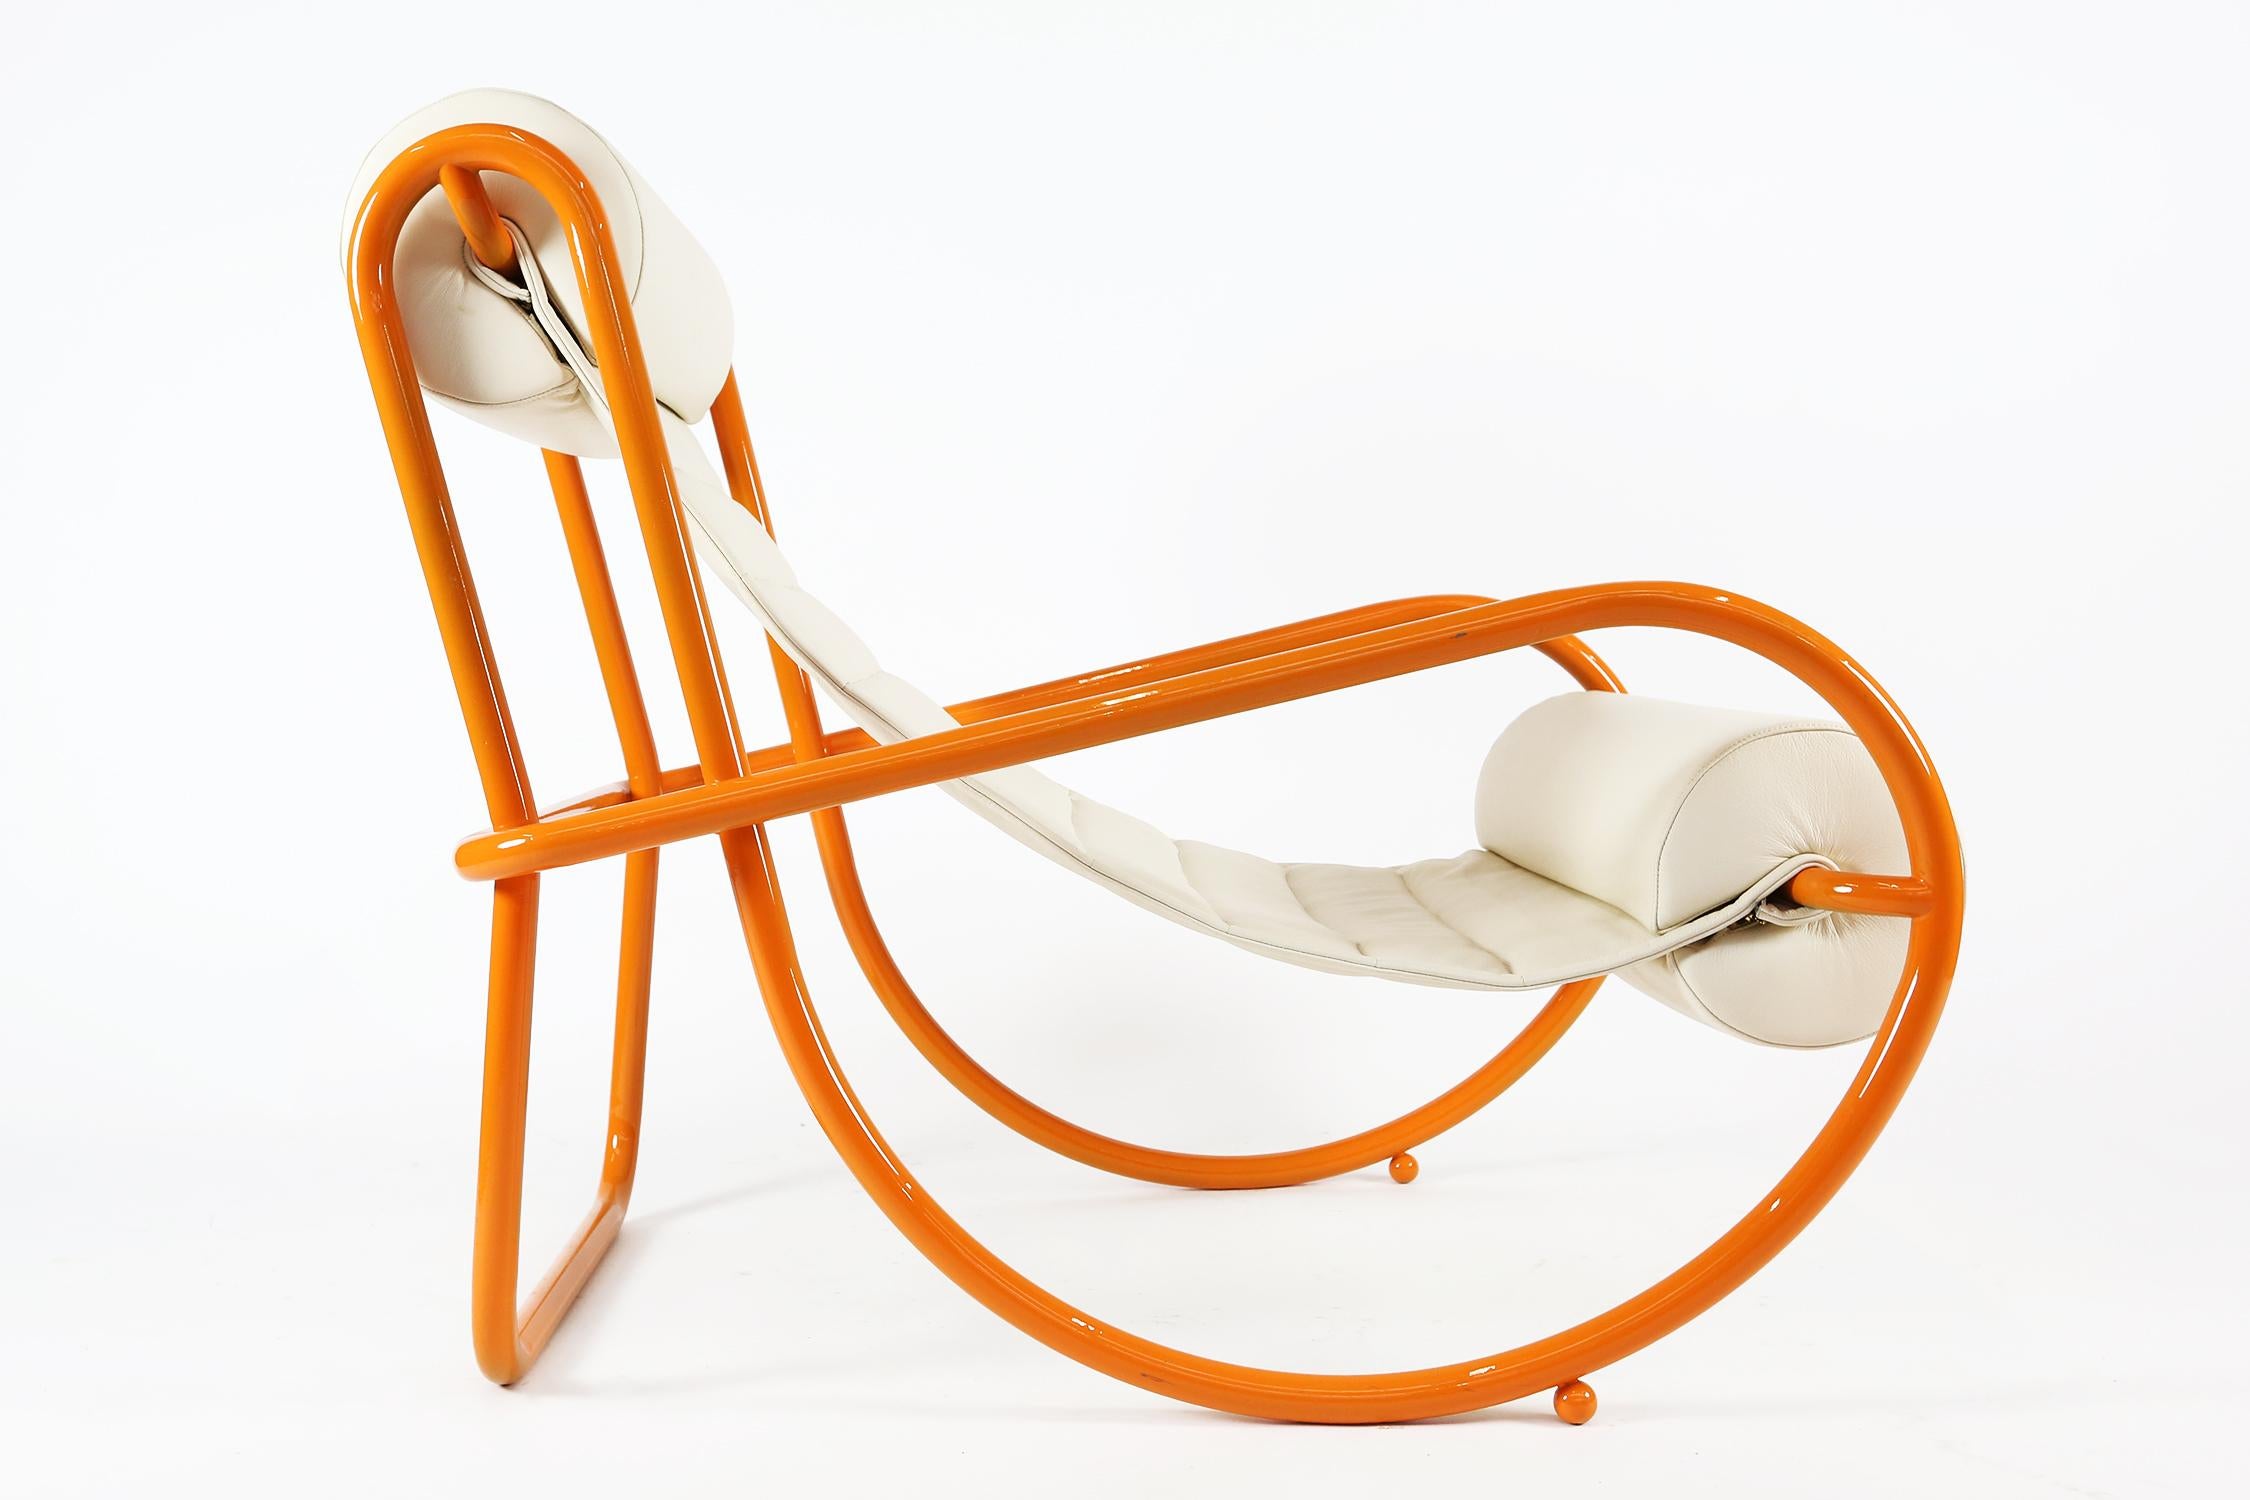 Lounge chair Locus Solus, in metal and leather, by Gae Aulenti for Poltronova, Italy, 1963.

This is an 1960 edItion chair, Proffesionaly restored and new leather.